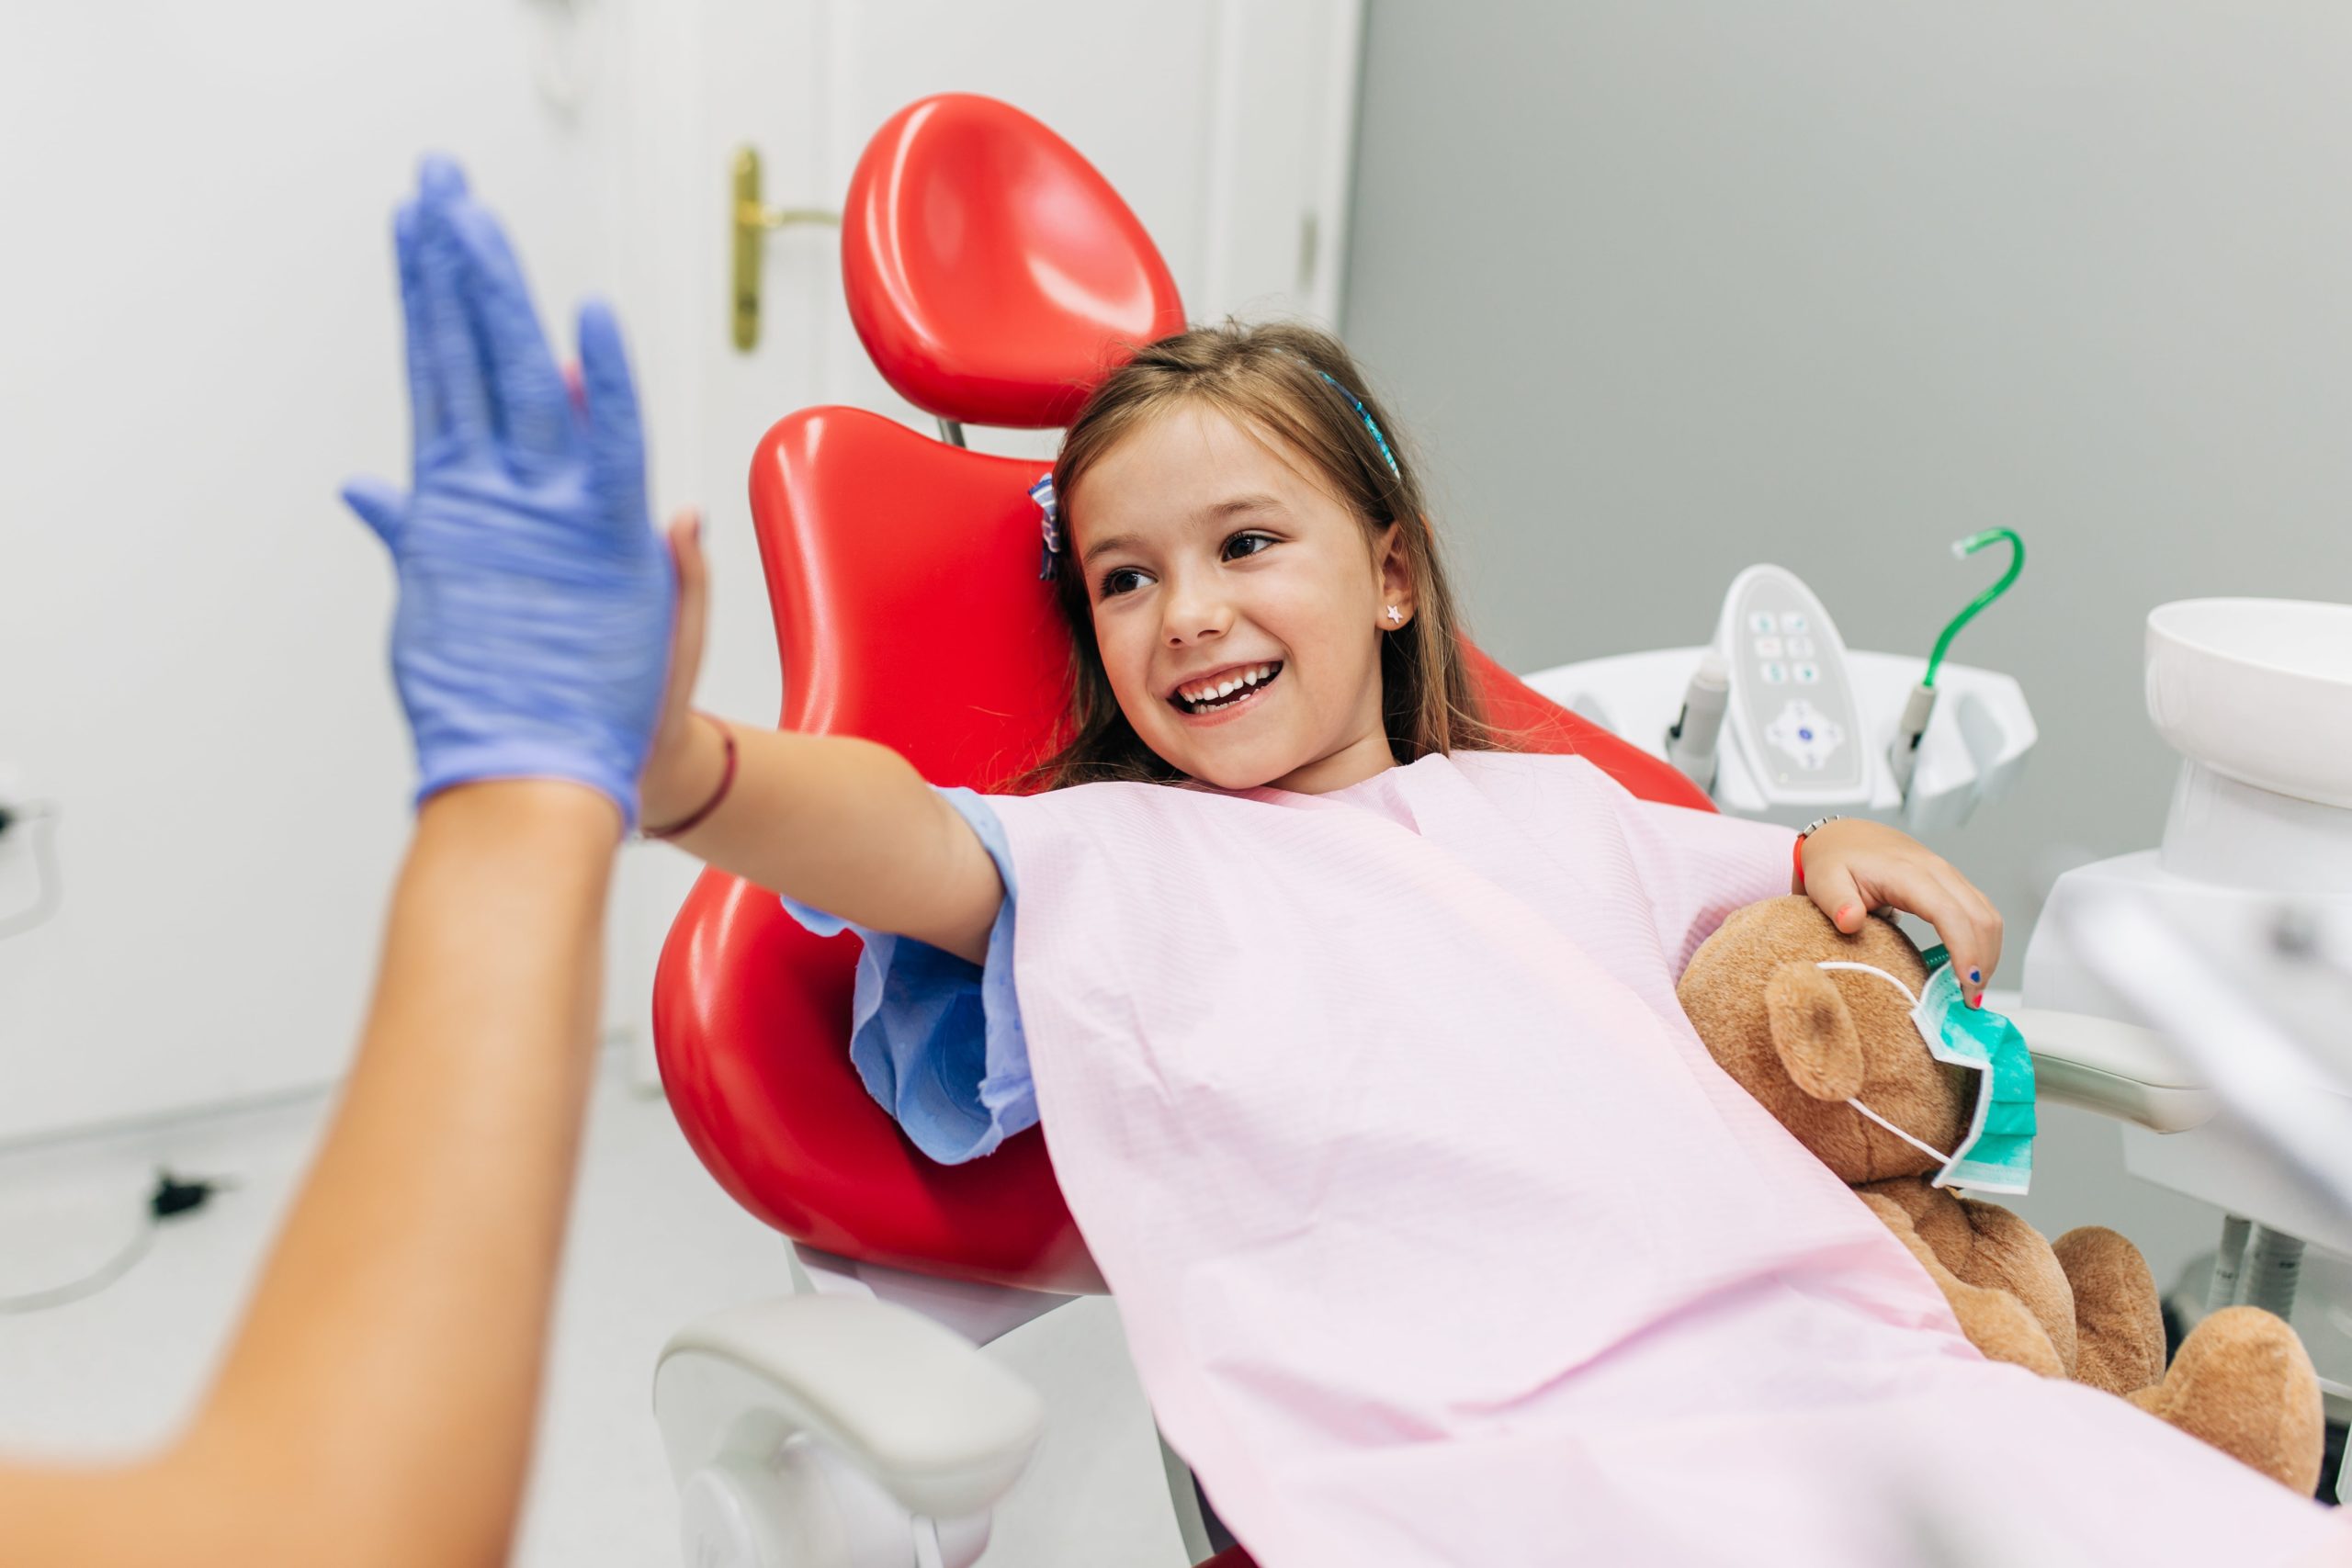 A Parent’s Guide to Teaching Good Oral Hygiene Habits to Kids